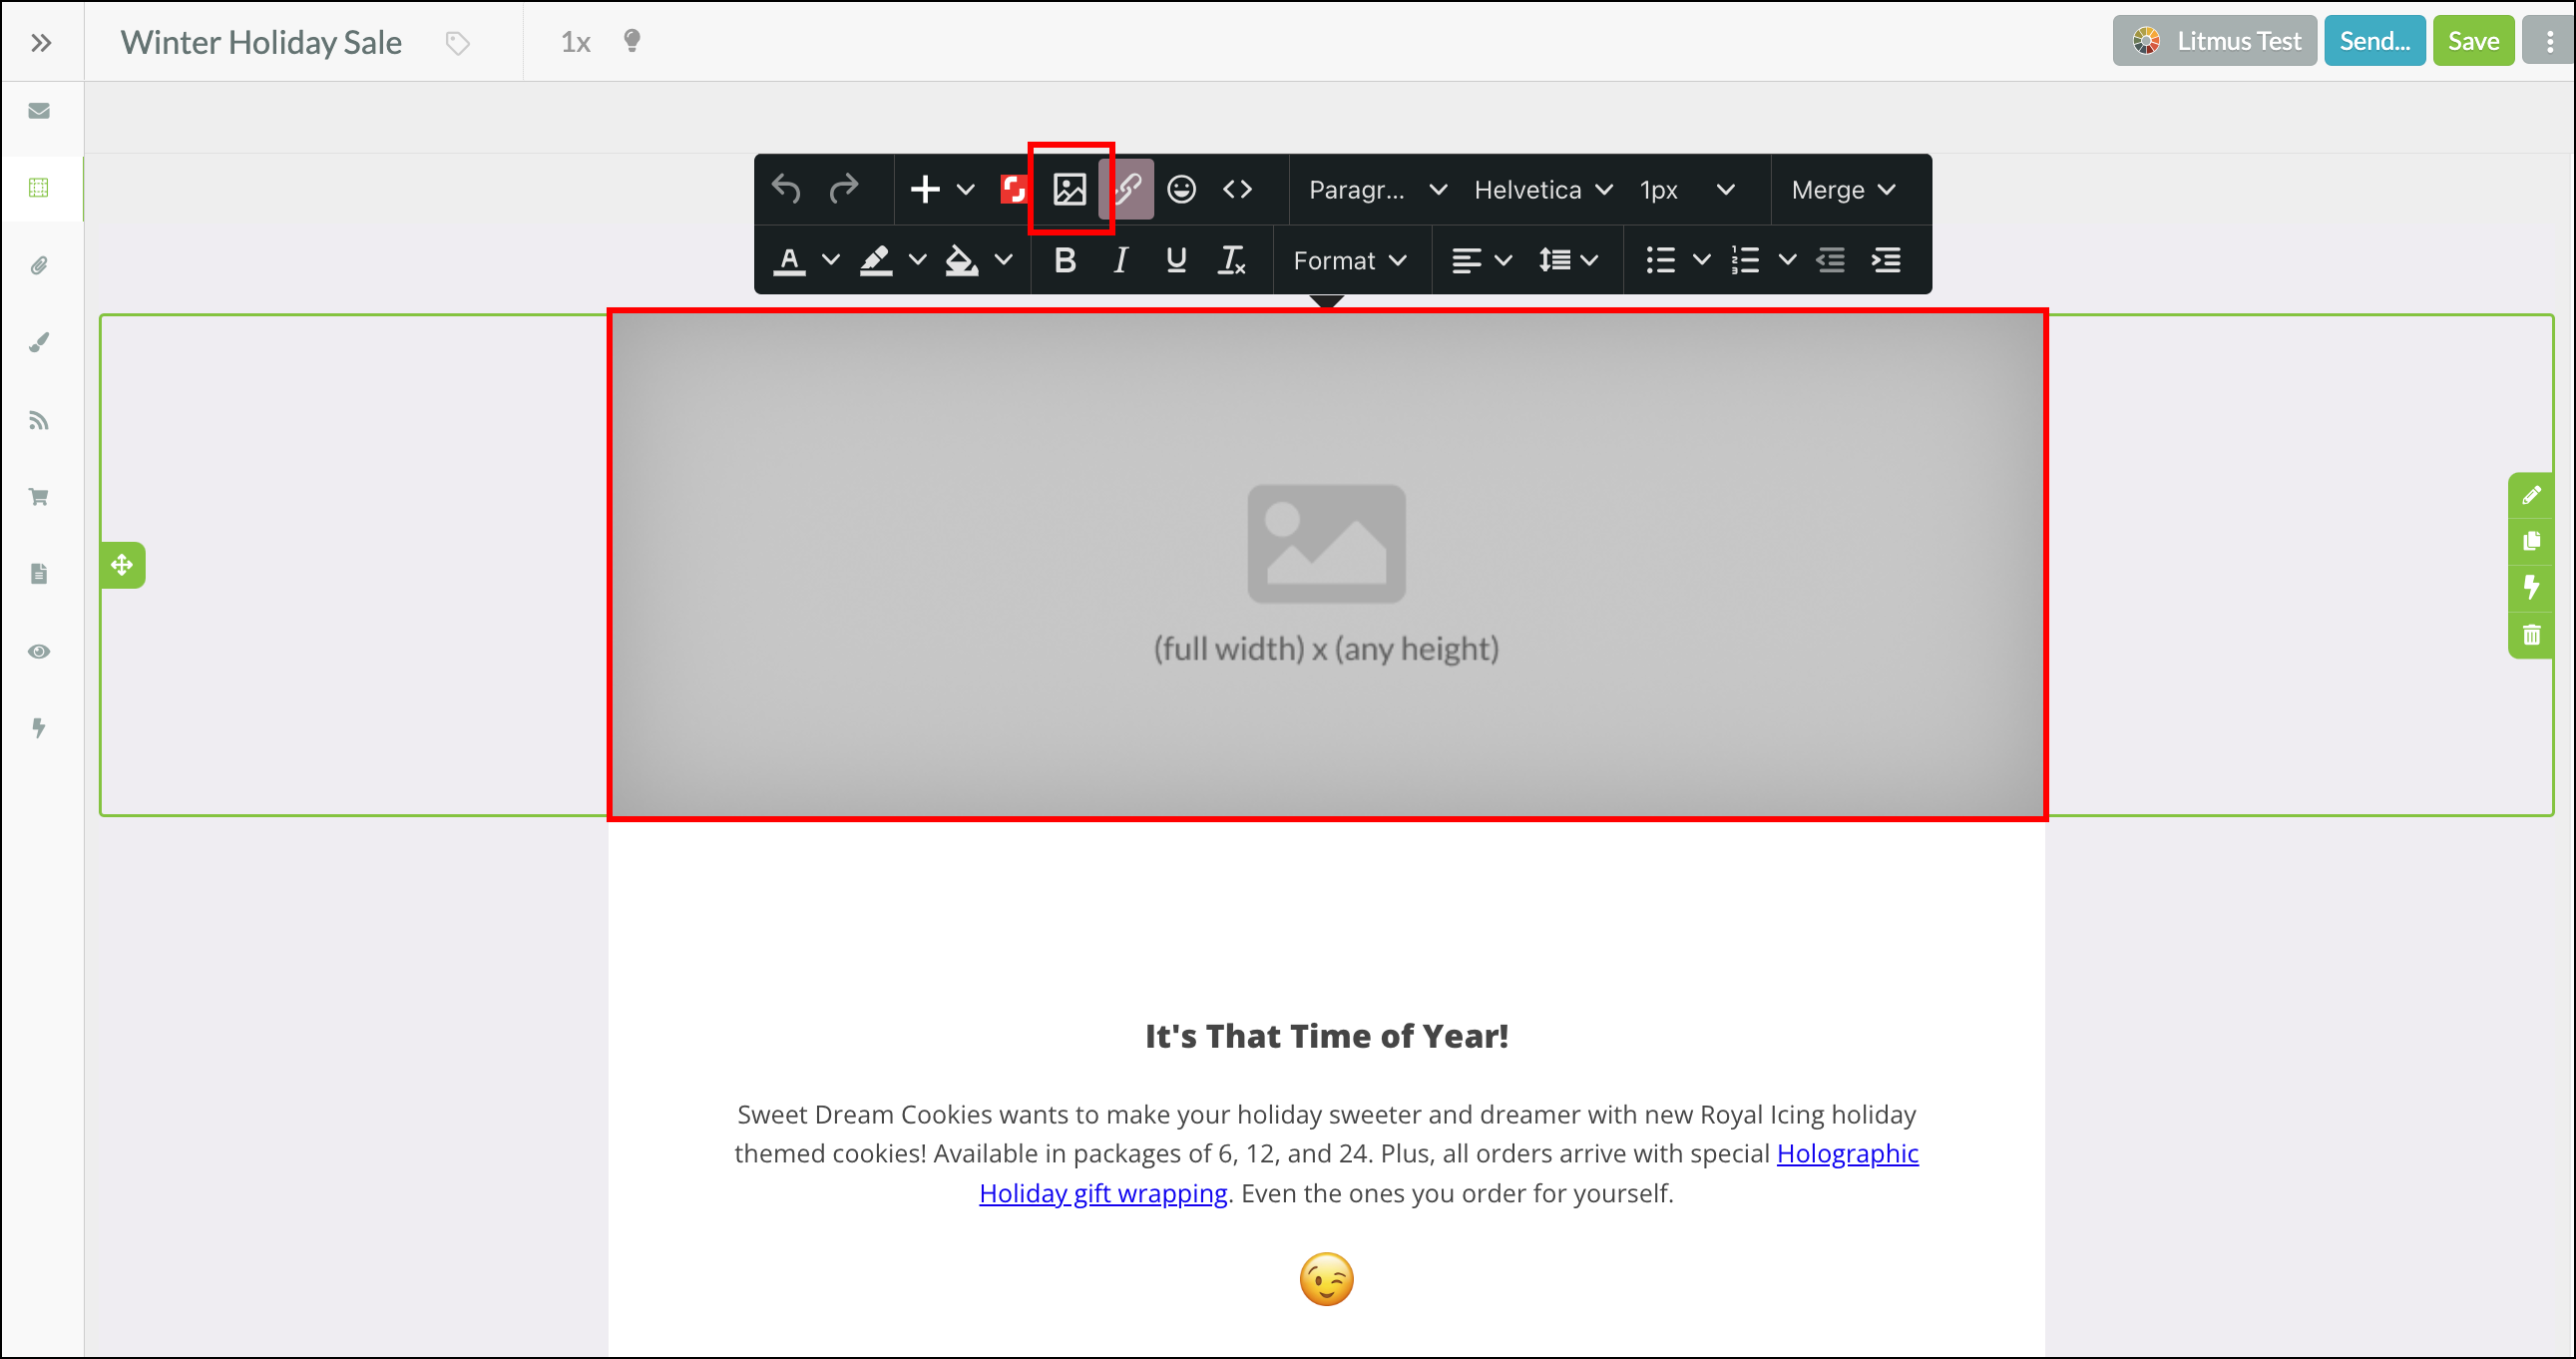 Click the picture icon in the Email Designer bar